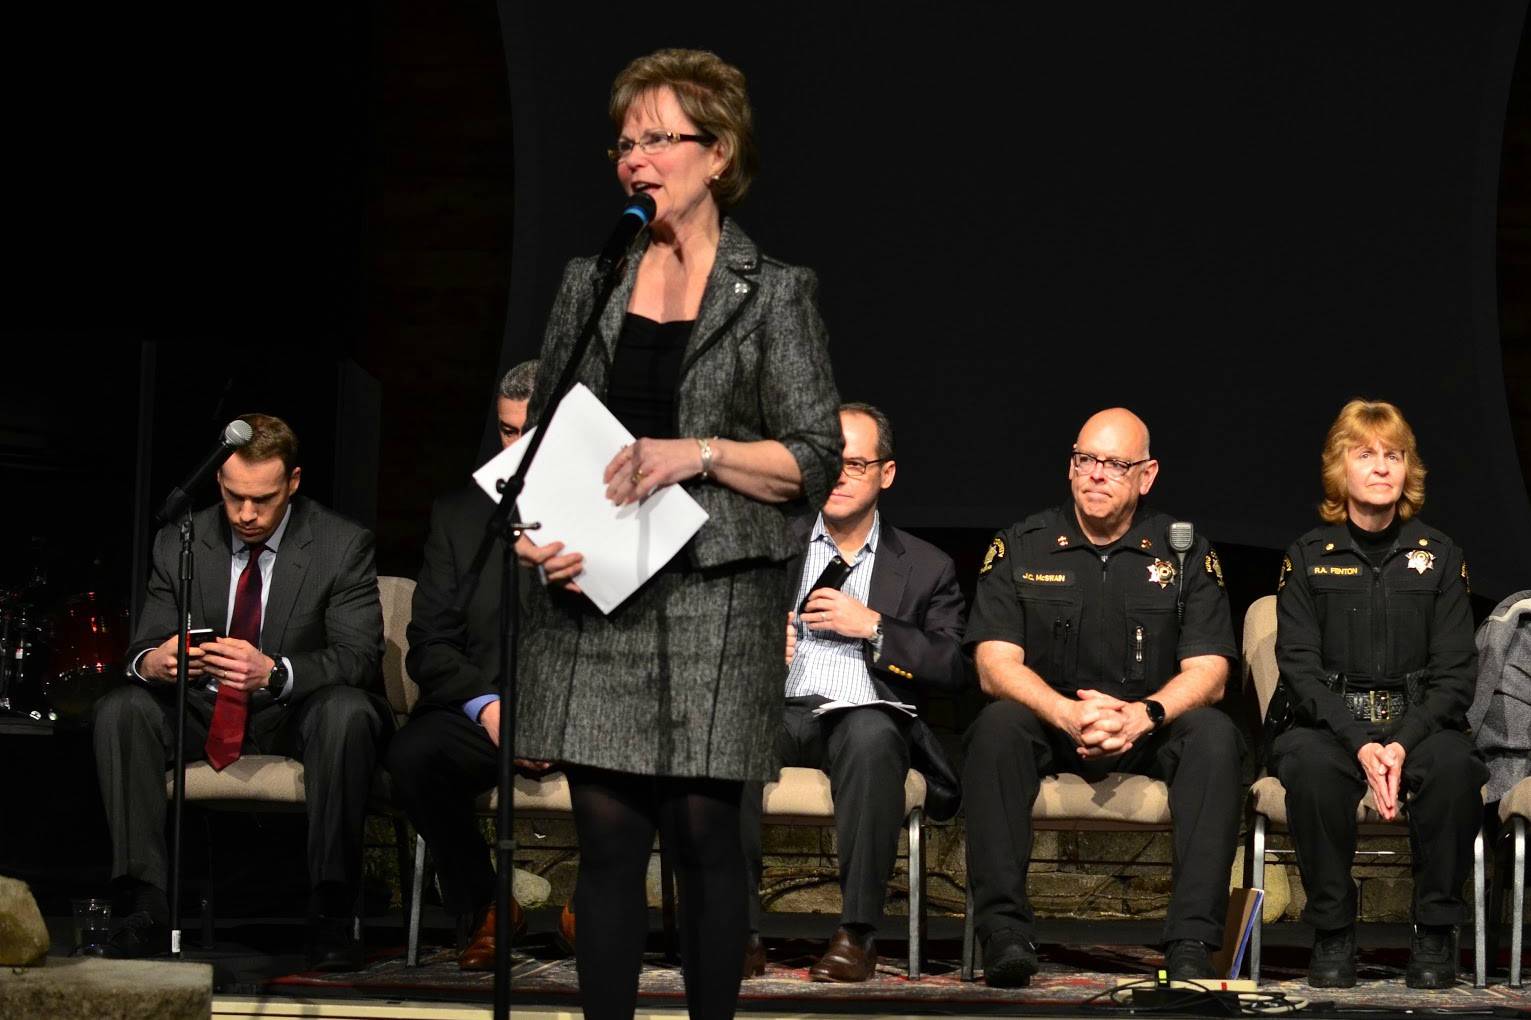 King County Councilmember Kathy Lambert leads the discussion at the opioid event on Monday night. Photo by Josh Kelety